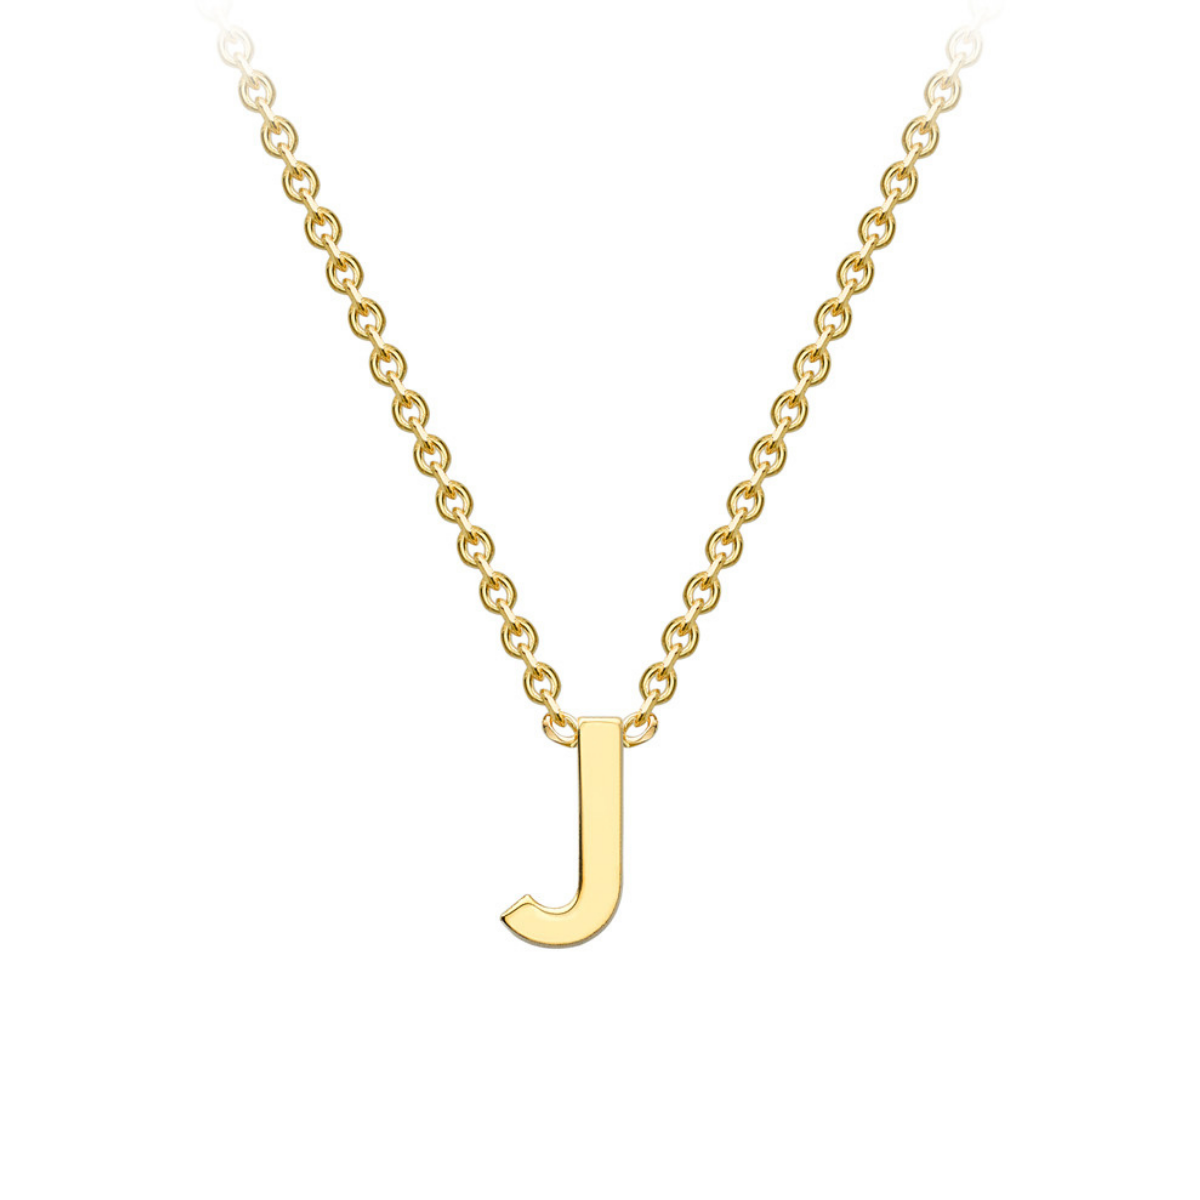 PETITE 'J' INITIAL NECKLACE | 9K SOLID GOLD